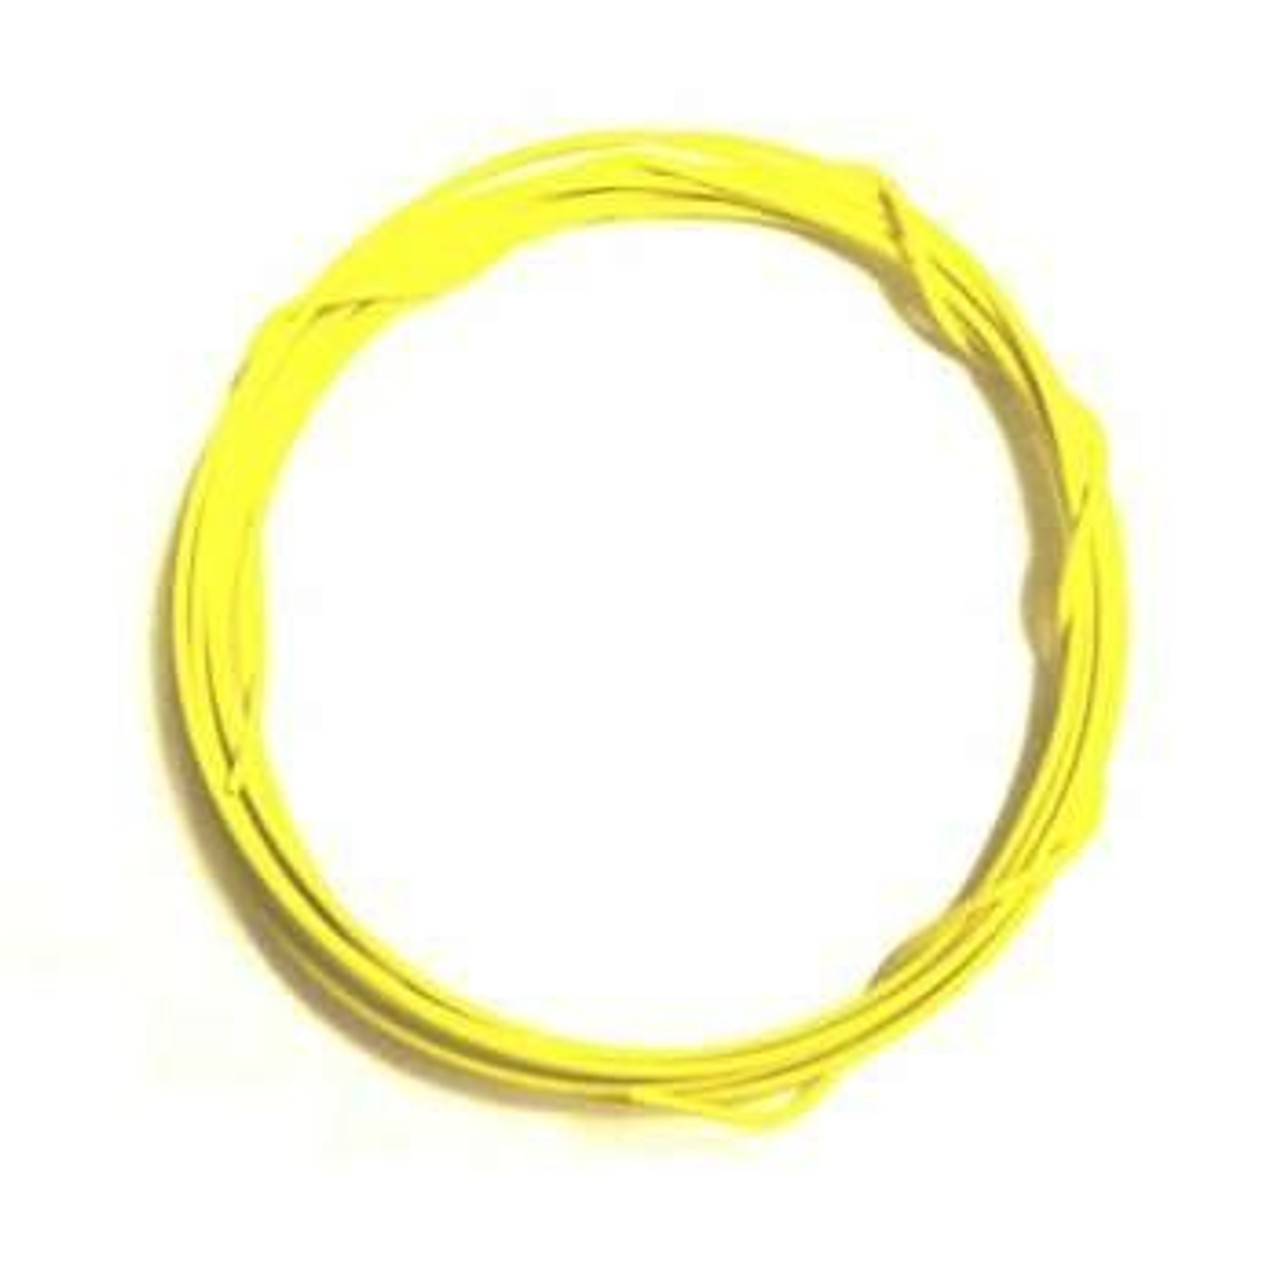 WIRE26-YEL Graves RC Hobbies 26 Gauge Wire - Yellow - 1 ft